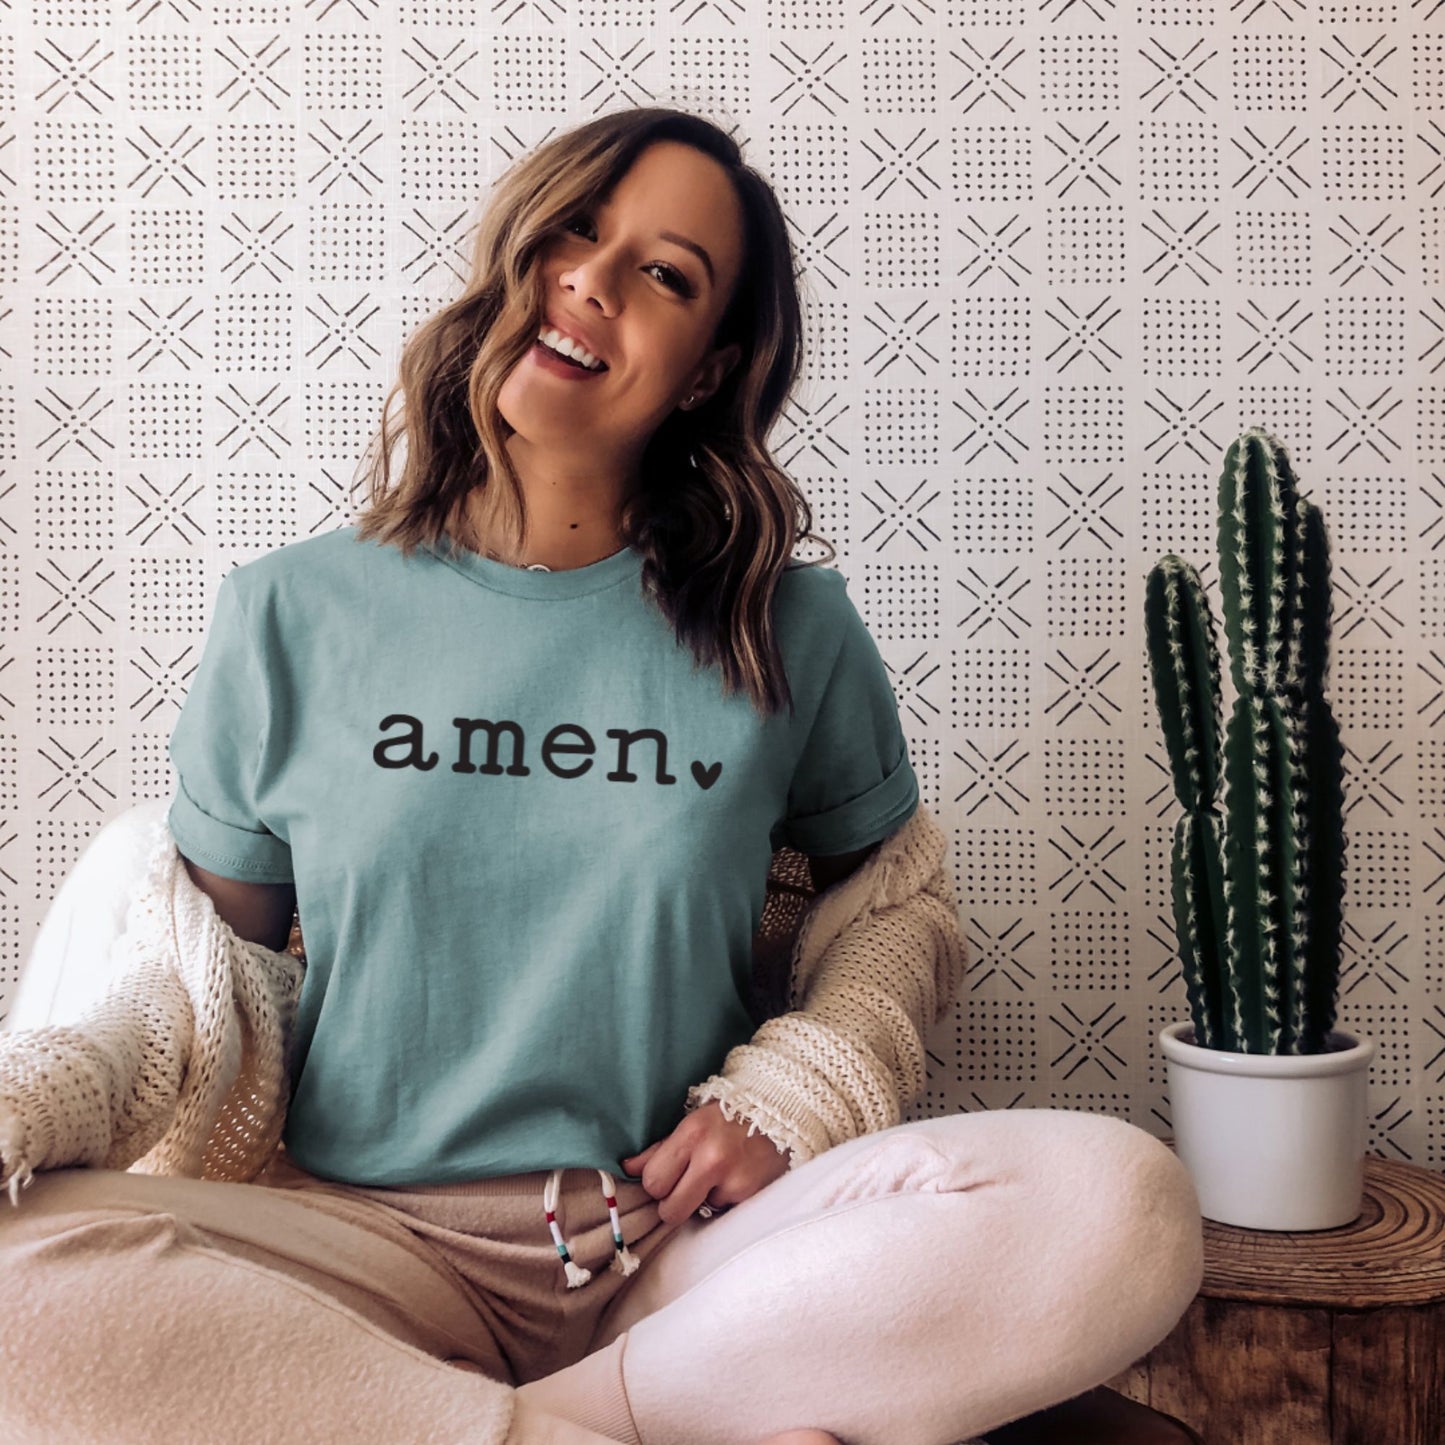 "Amen" Lightweight Cotton Tee: Elevate Your Laid-Back Look with Faith